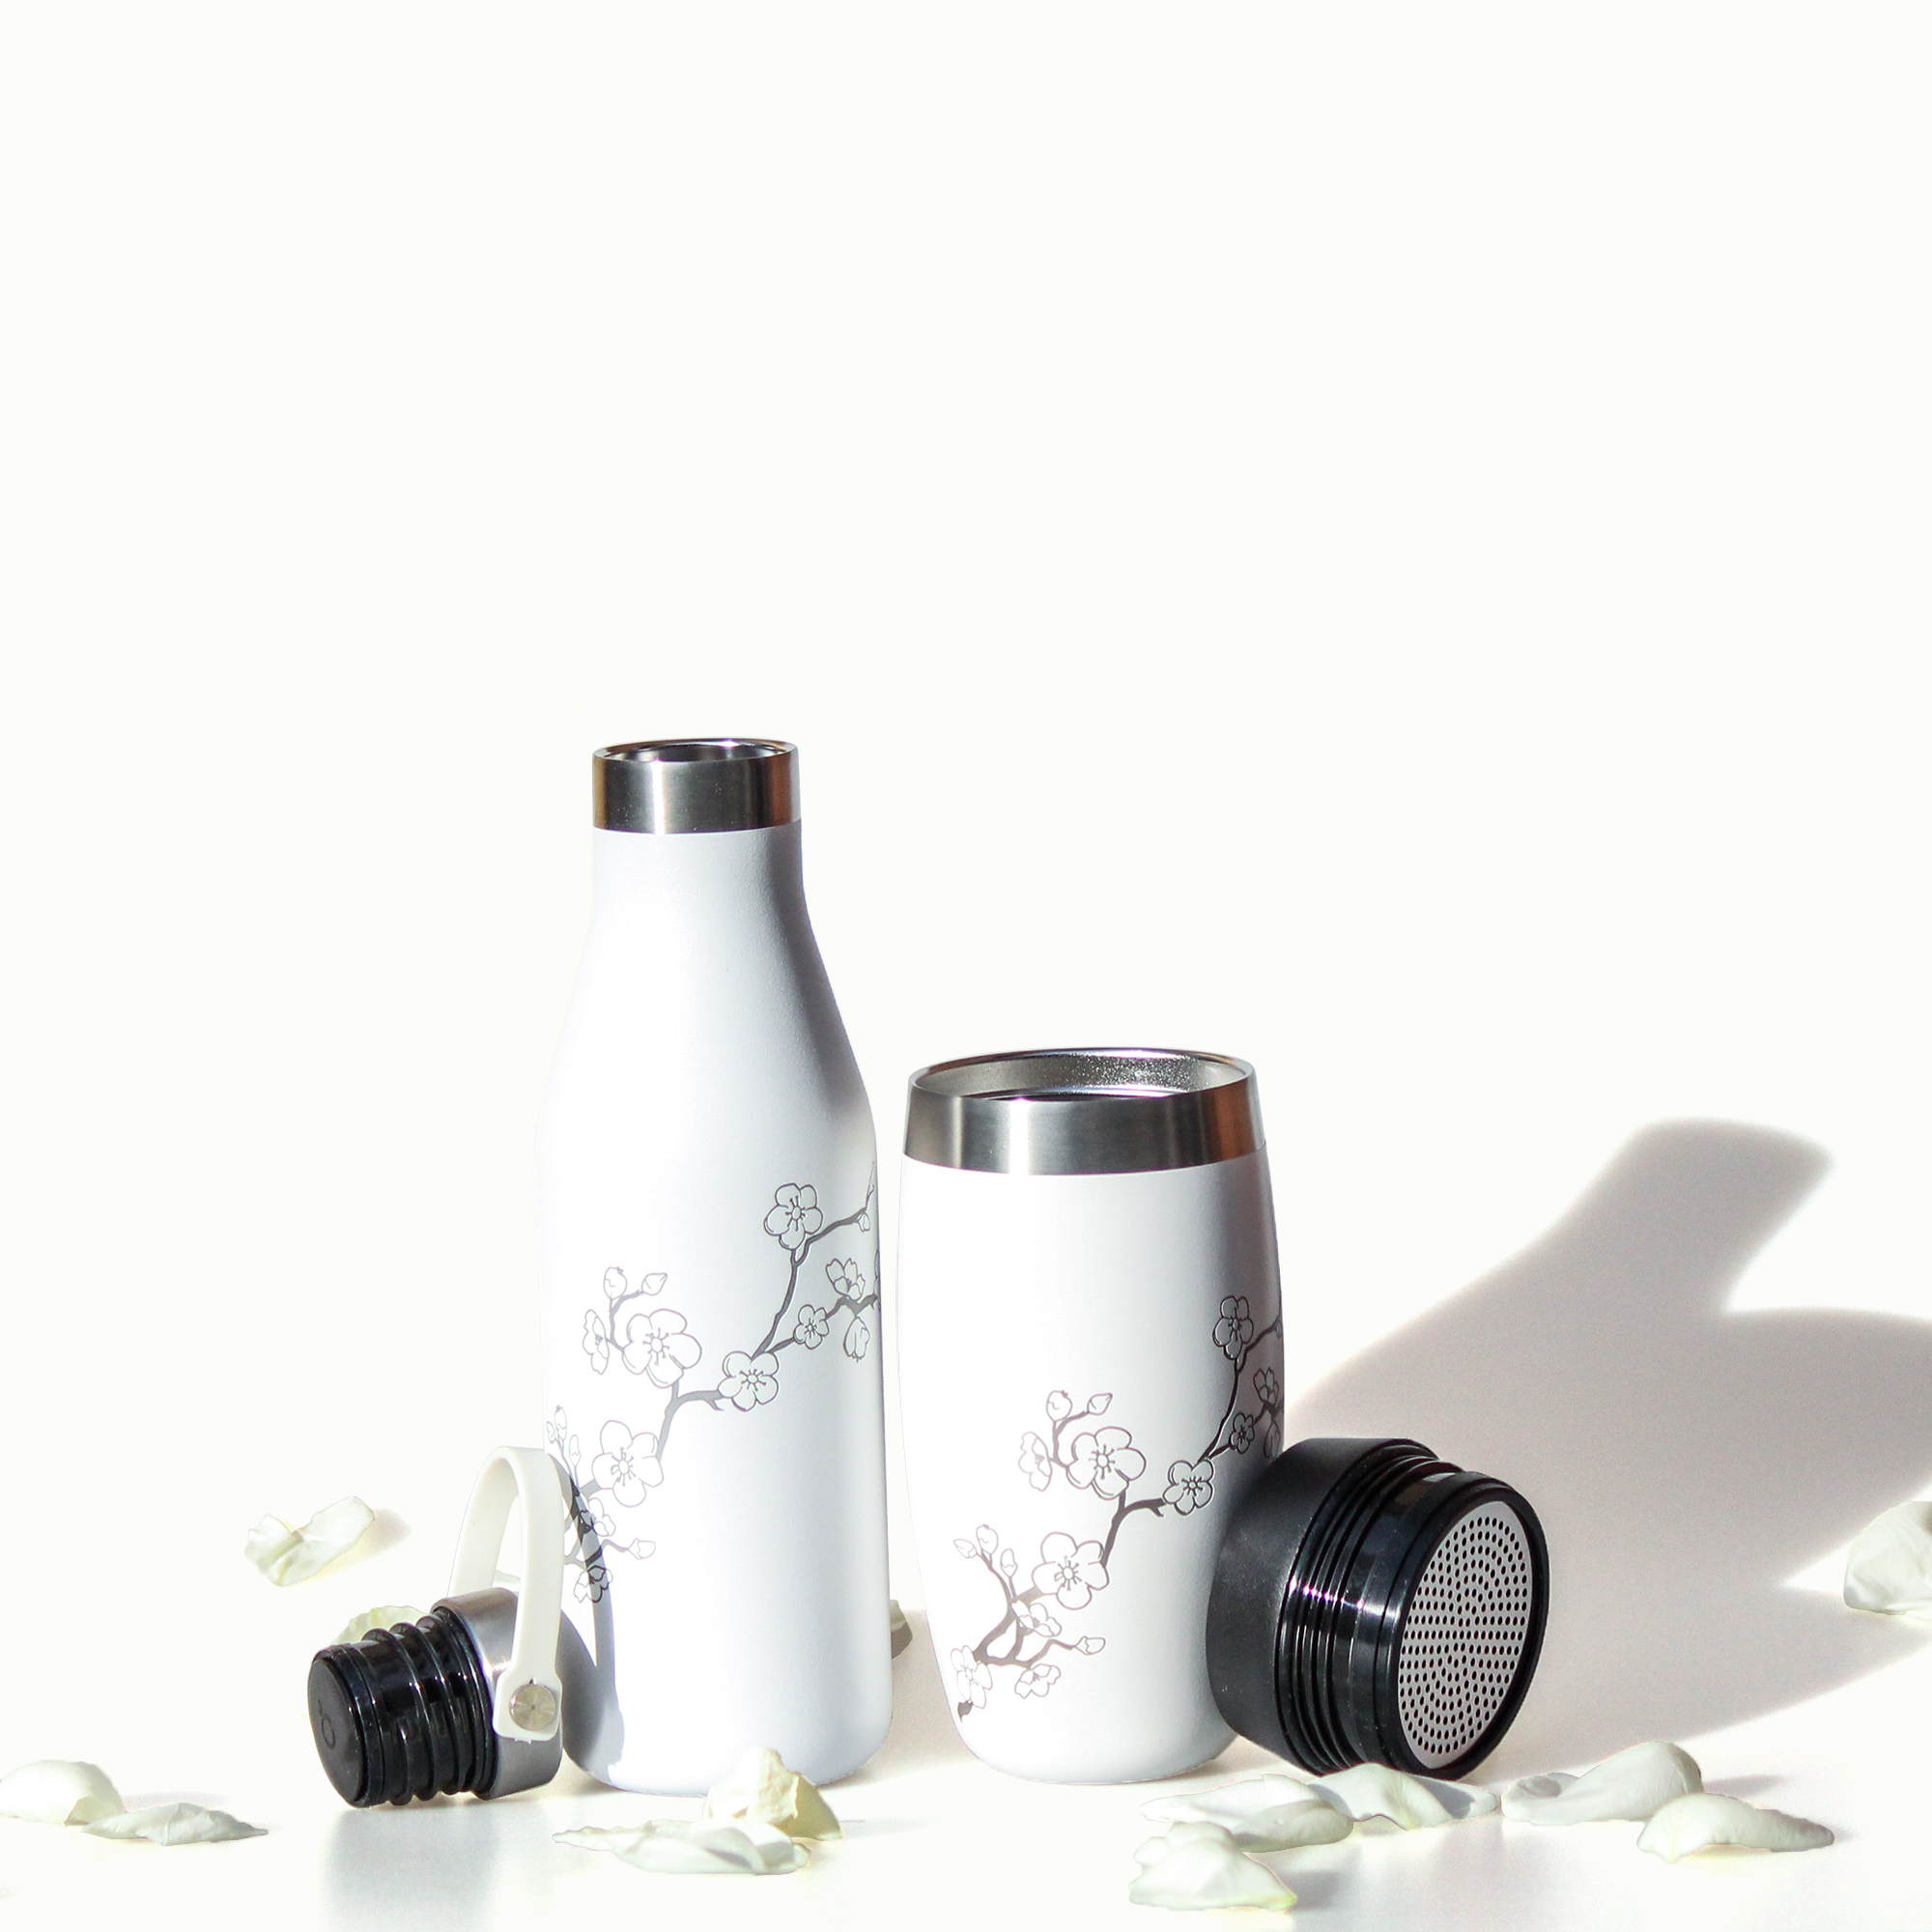 Cherry blossom Ohelo sustainable bottle and tumbler for consumers designed by Simple Design Works in Hereford